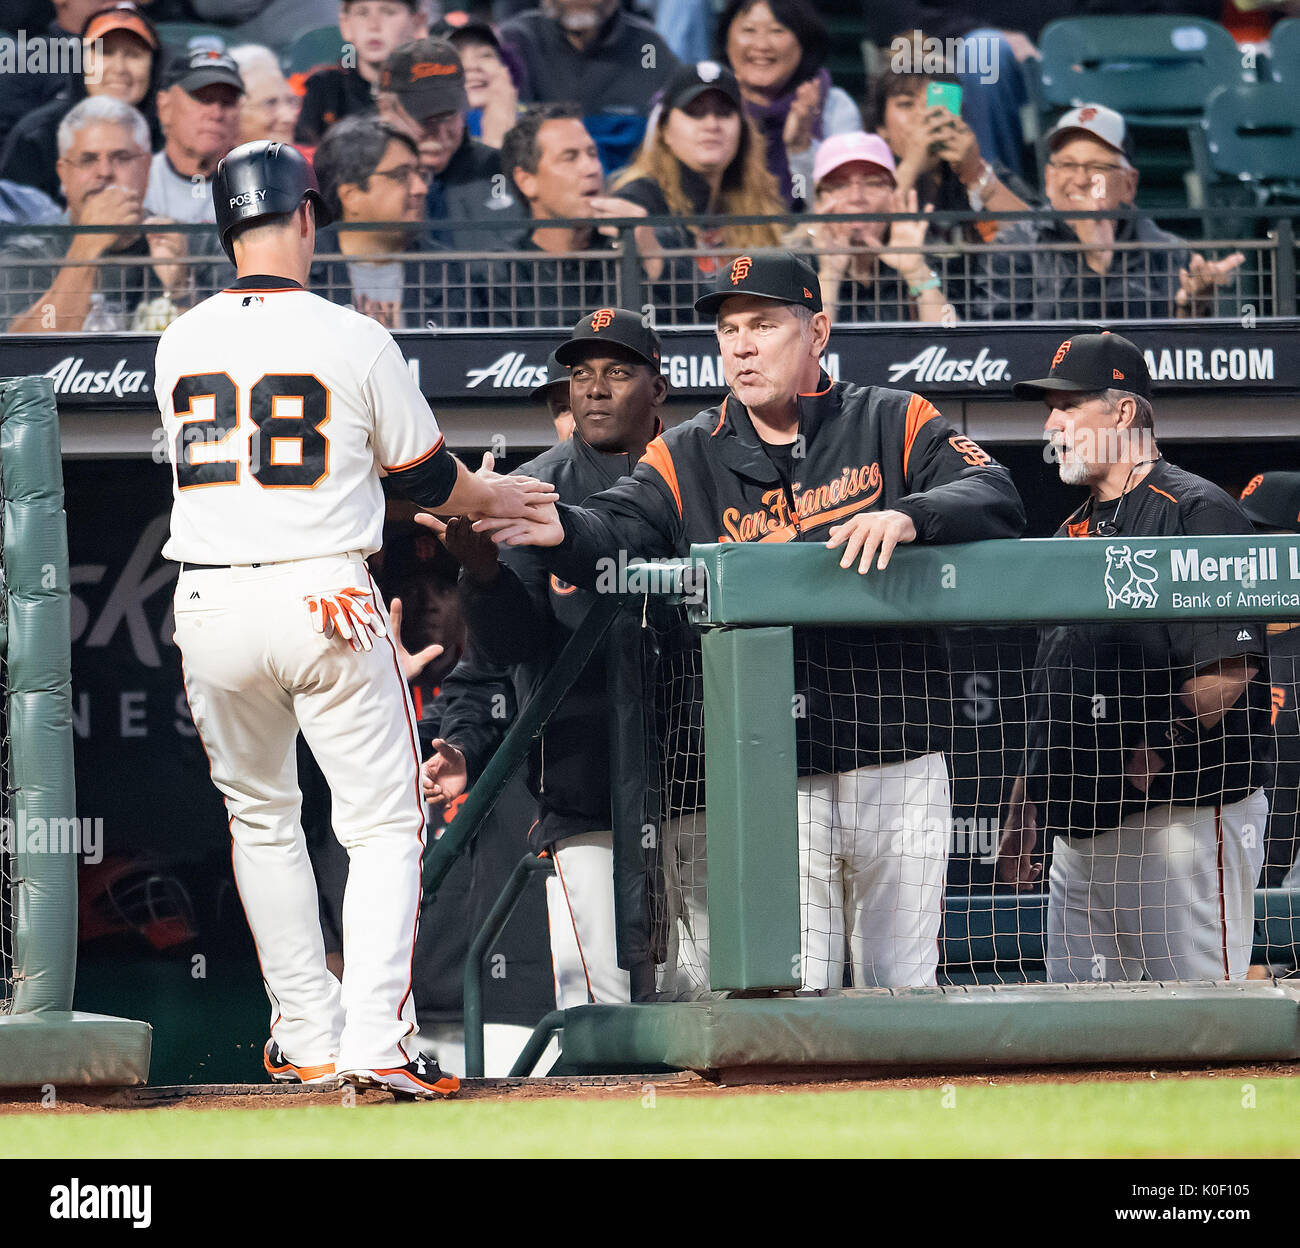 San Francisco, USA. 22nd Aug, 2017. San Francisco Giants catcher Buster Posey (28) is greeted in the dugout after scoring the Giant's first run, during a MLB game between the Milwaukee Brewers and the San Francisco Giants at AT&T Park in San Francisco, California. Credit: Cal Sport Media/Alamy Live News Stock Photo